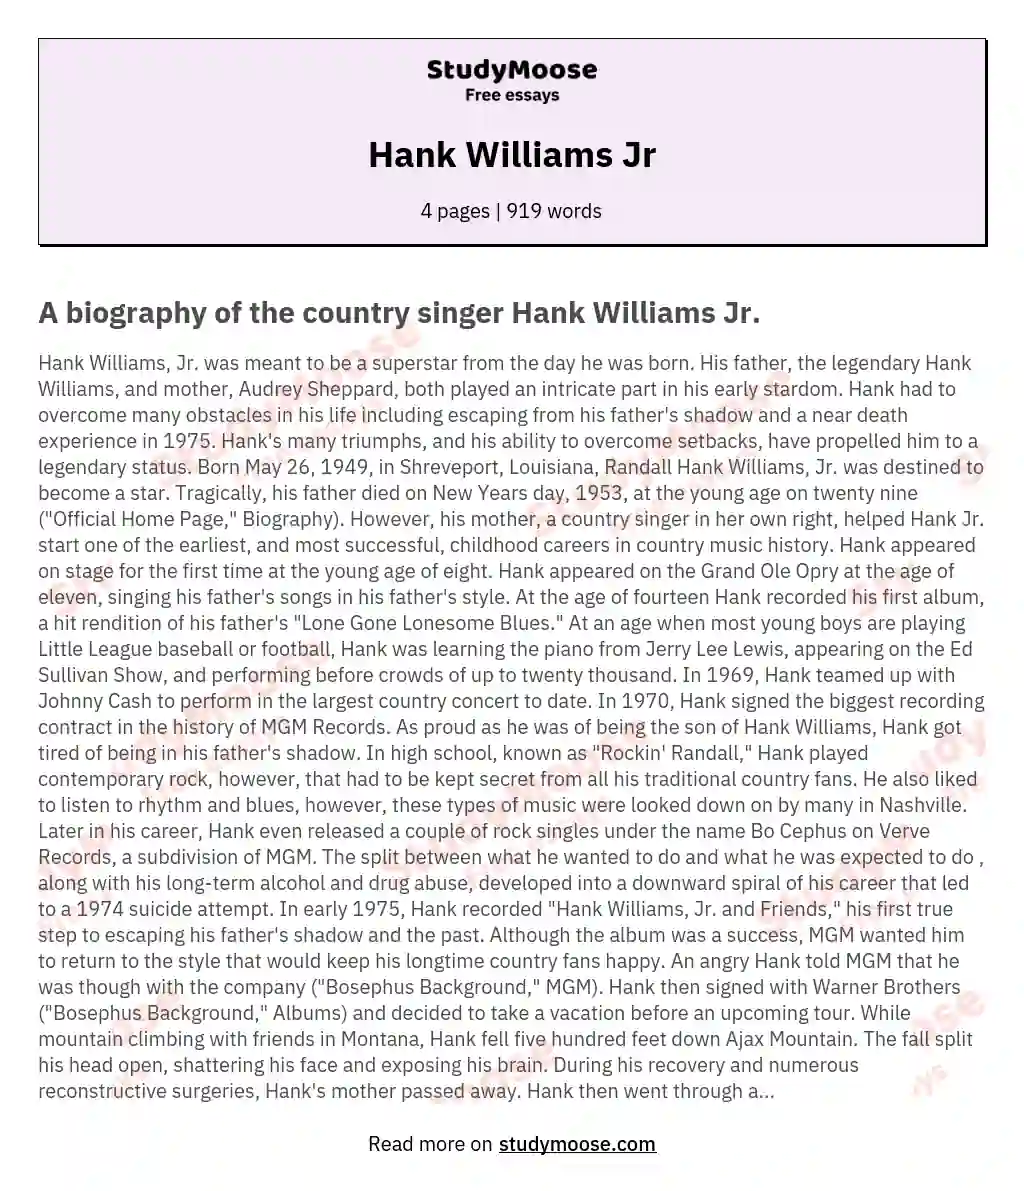 Hank Williams Jr.: Triumphs and Legacy in Country Music essay